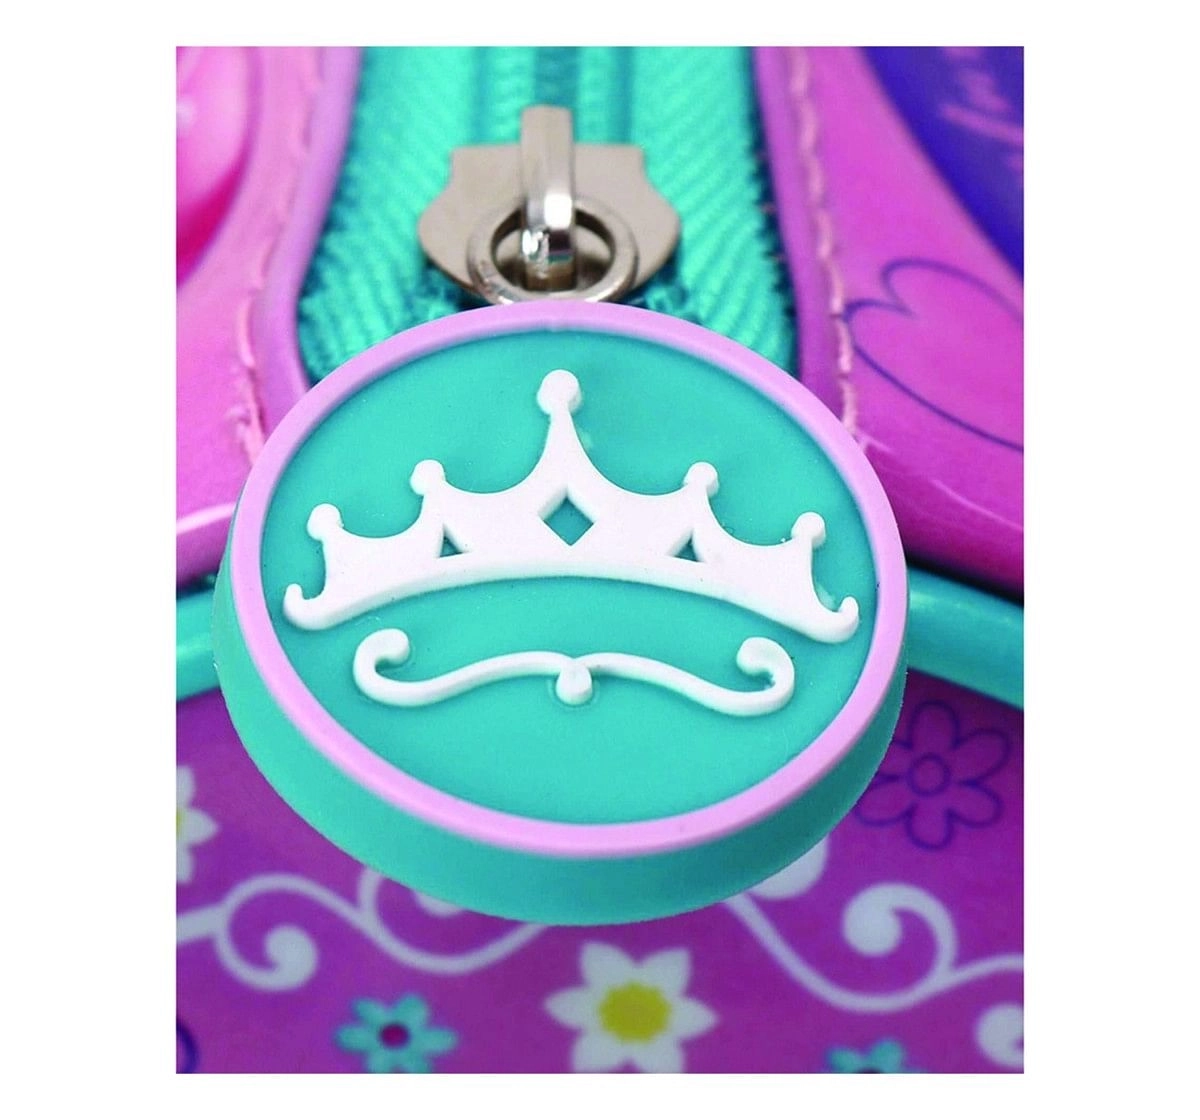 Disney Disney Princess Pink Round Pouch for, Quirky Soft Toys for  age 3Y+ - 23 Cm (Pink)